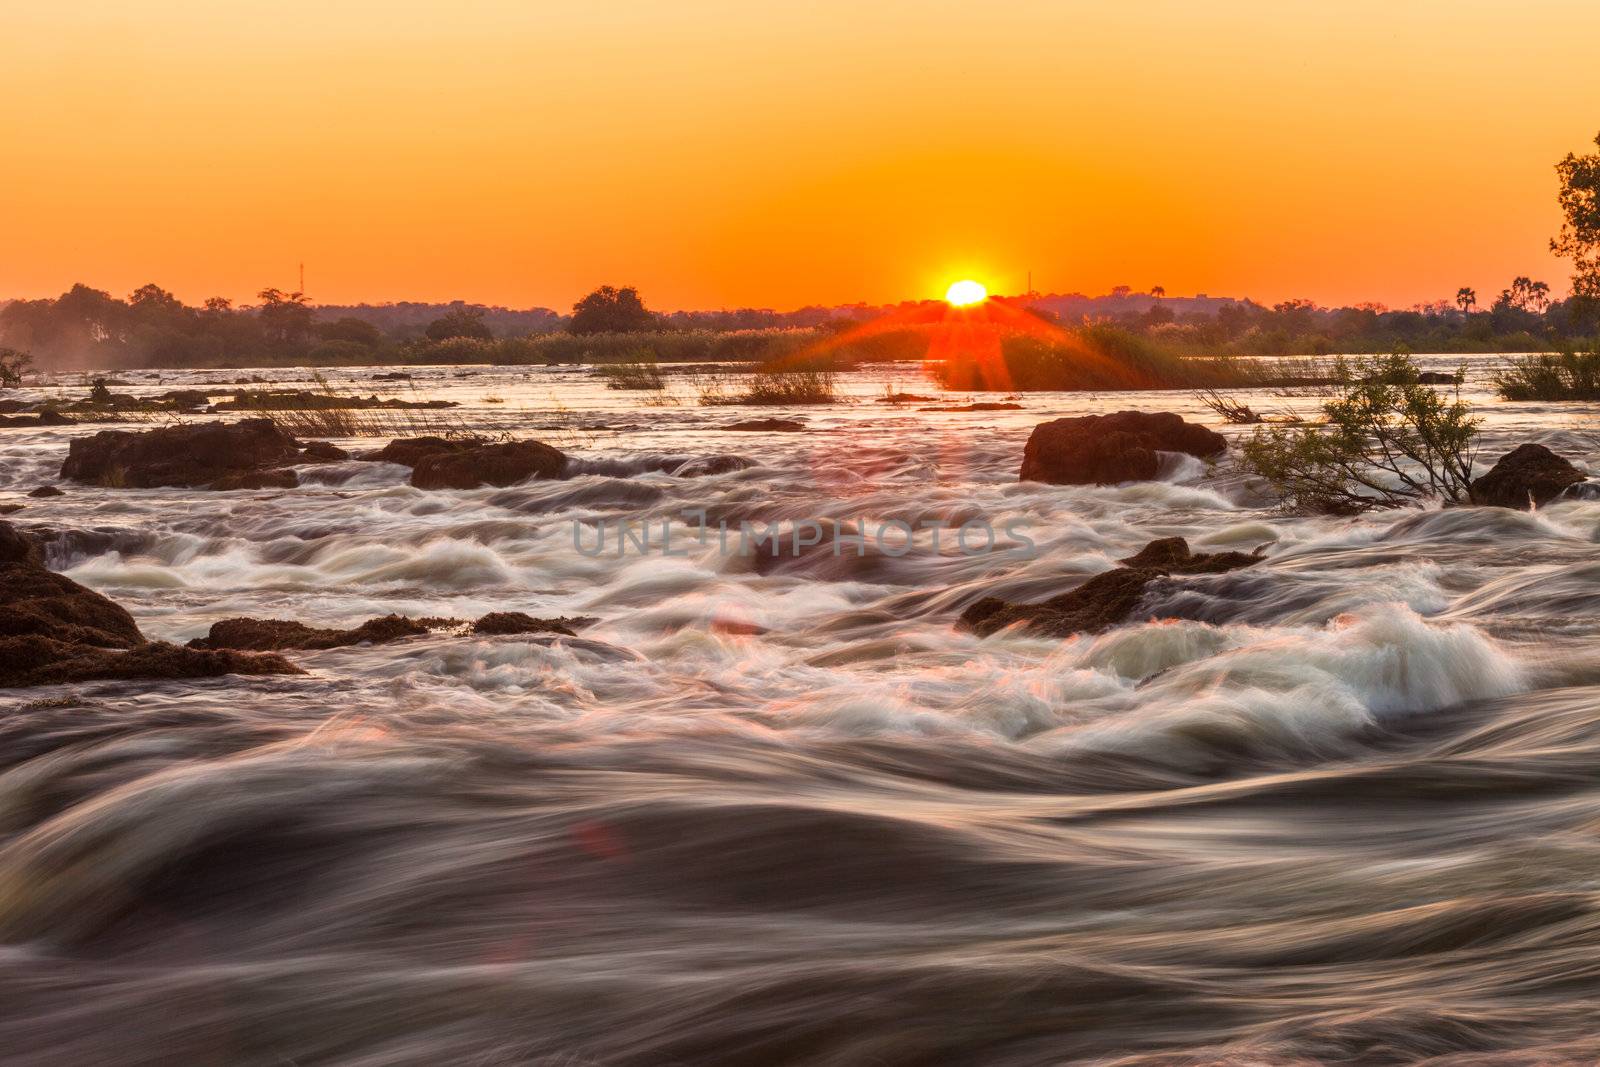 Whitewater rapids at Victoria Falls by edan